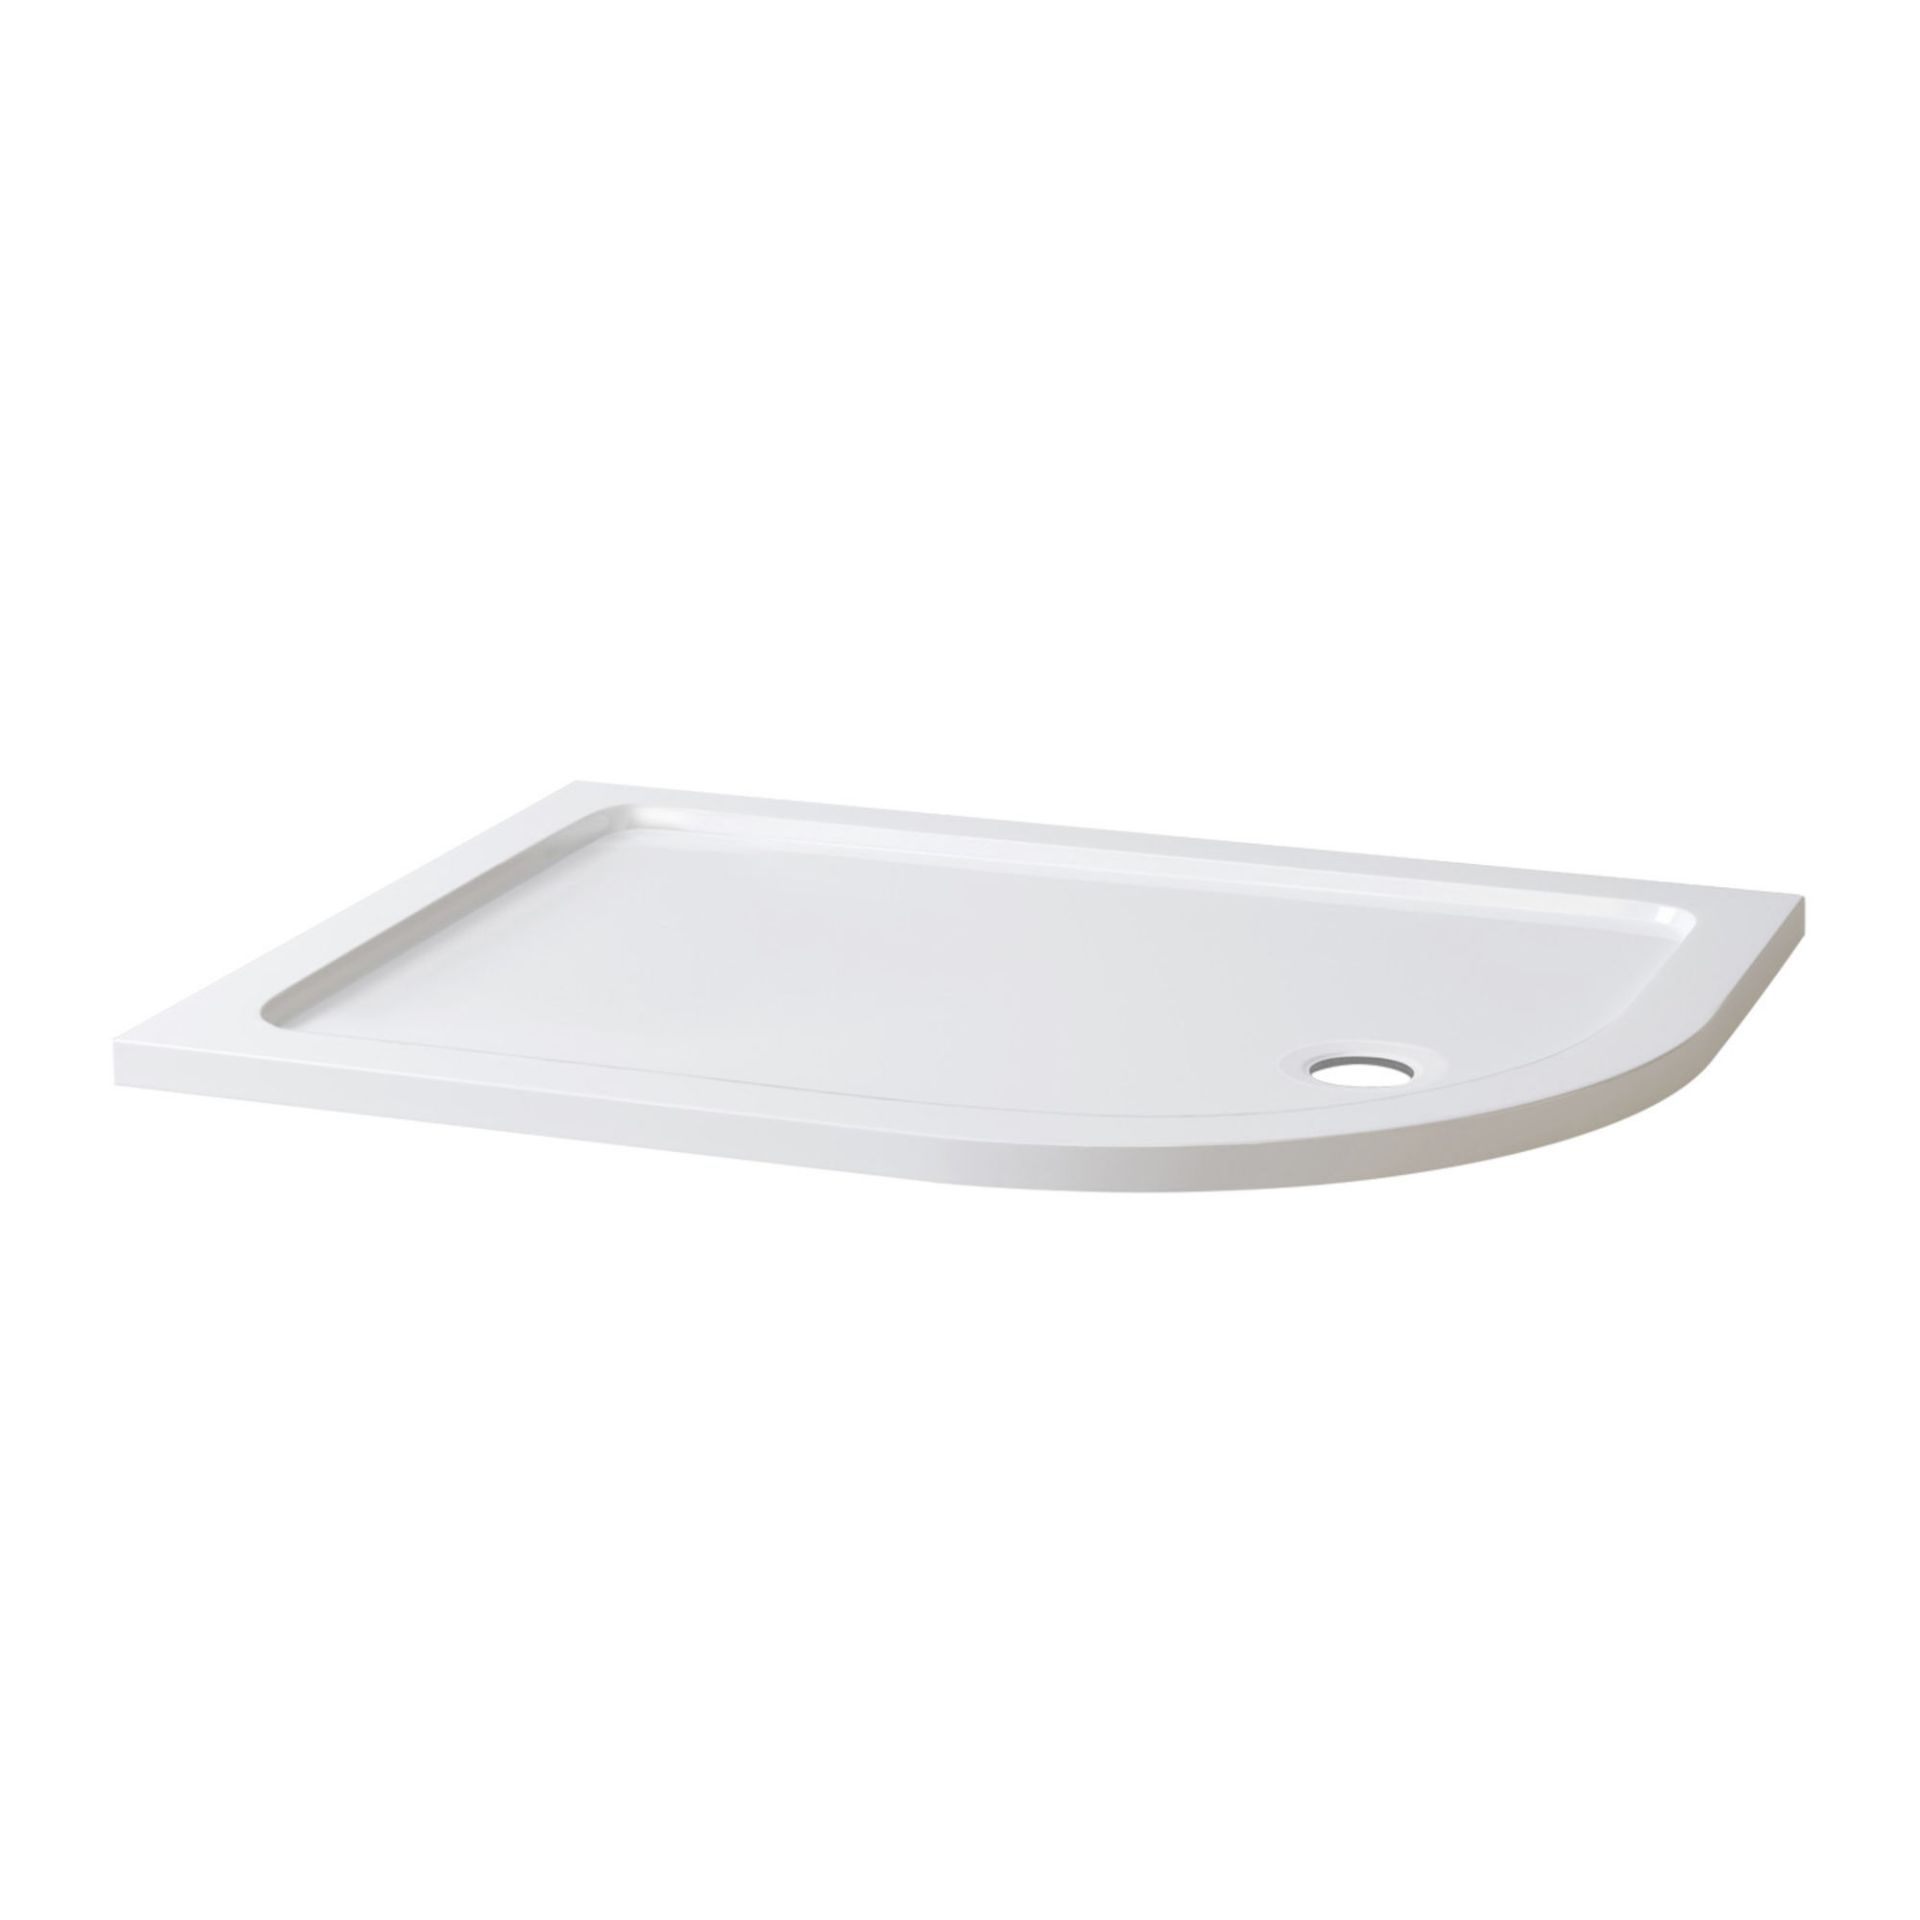 (AD54) 1200x900mm Offset Quadrant Ultra Slim Stone Shower Tray - Right. RRP £234.99. Low profile - Image 2 of 3